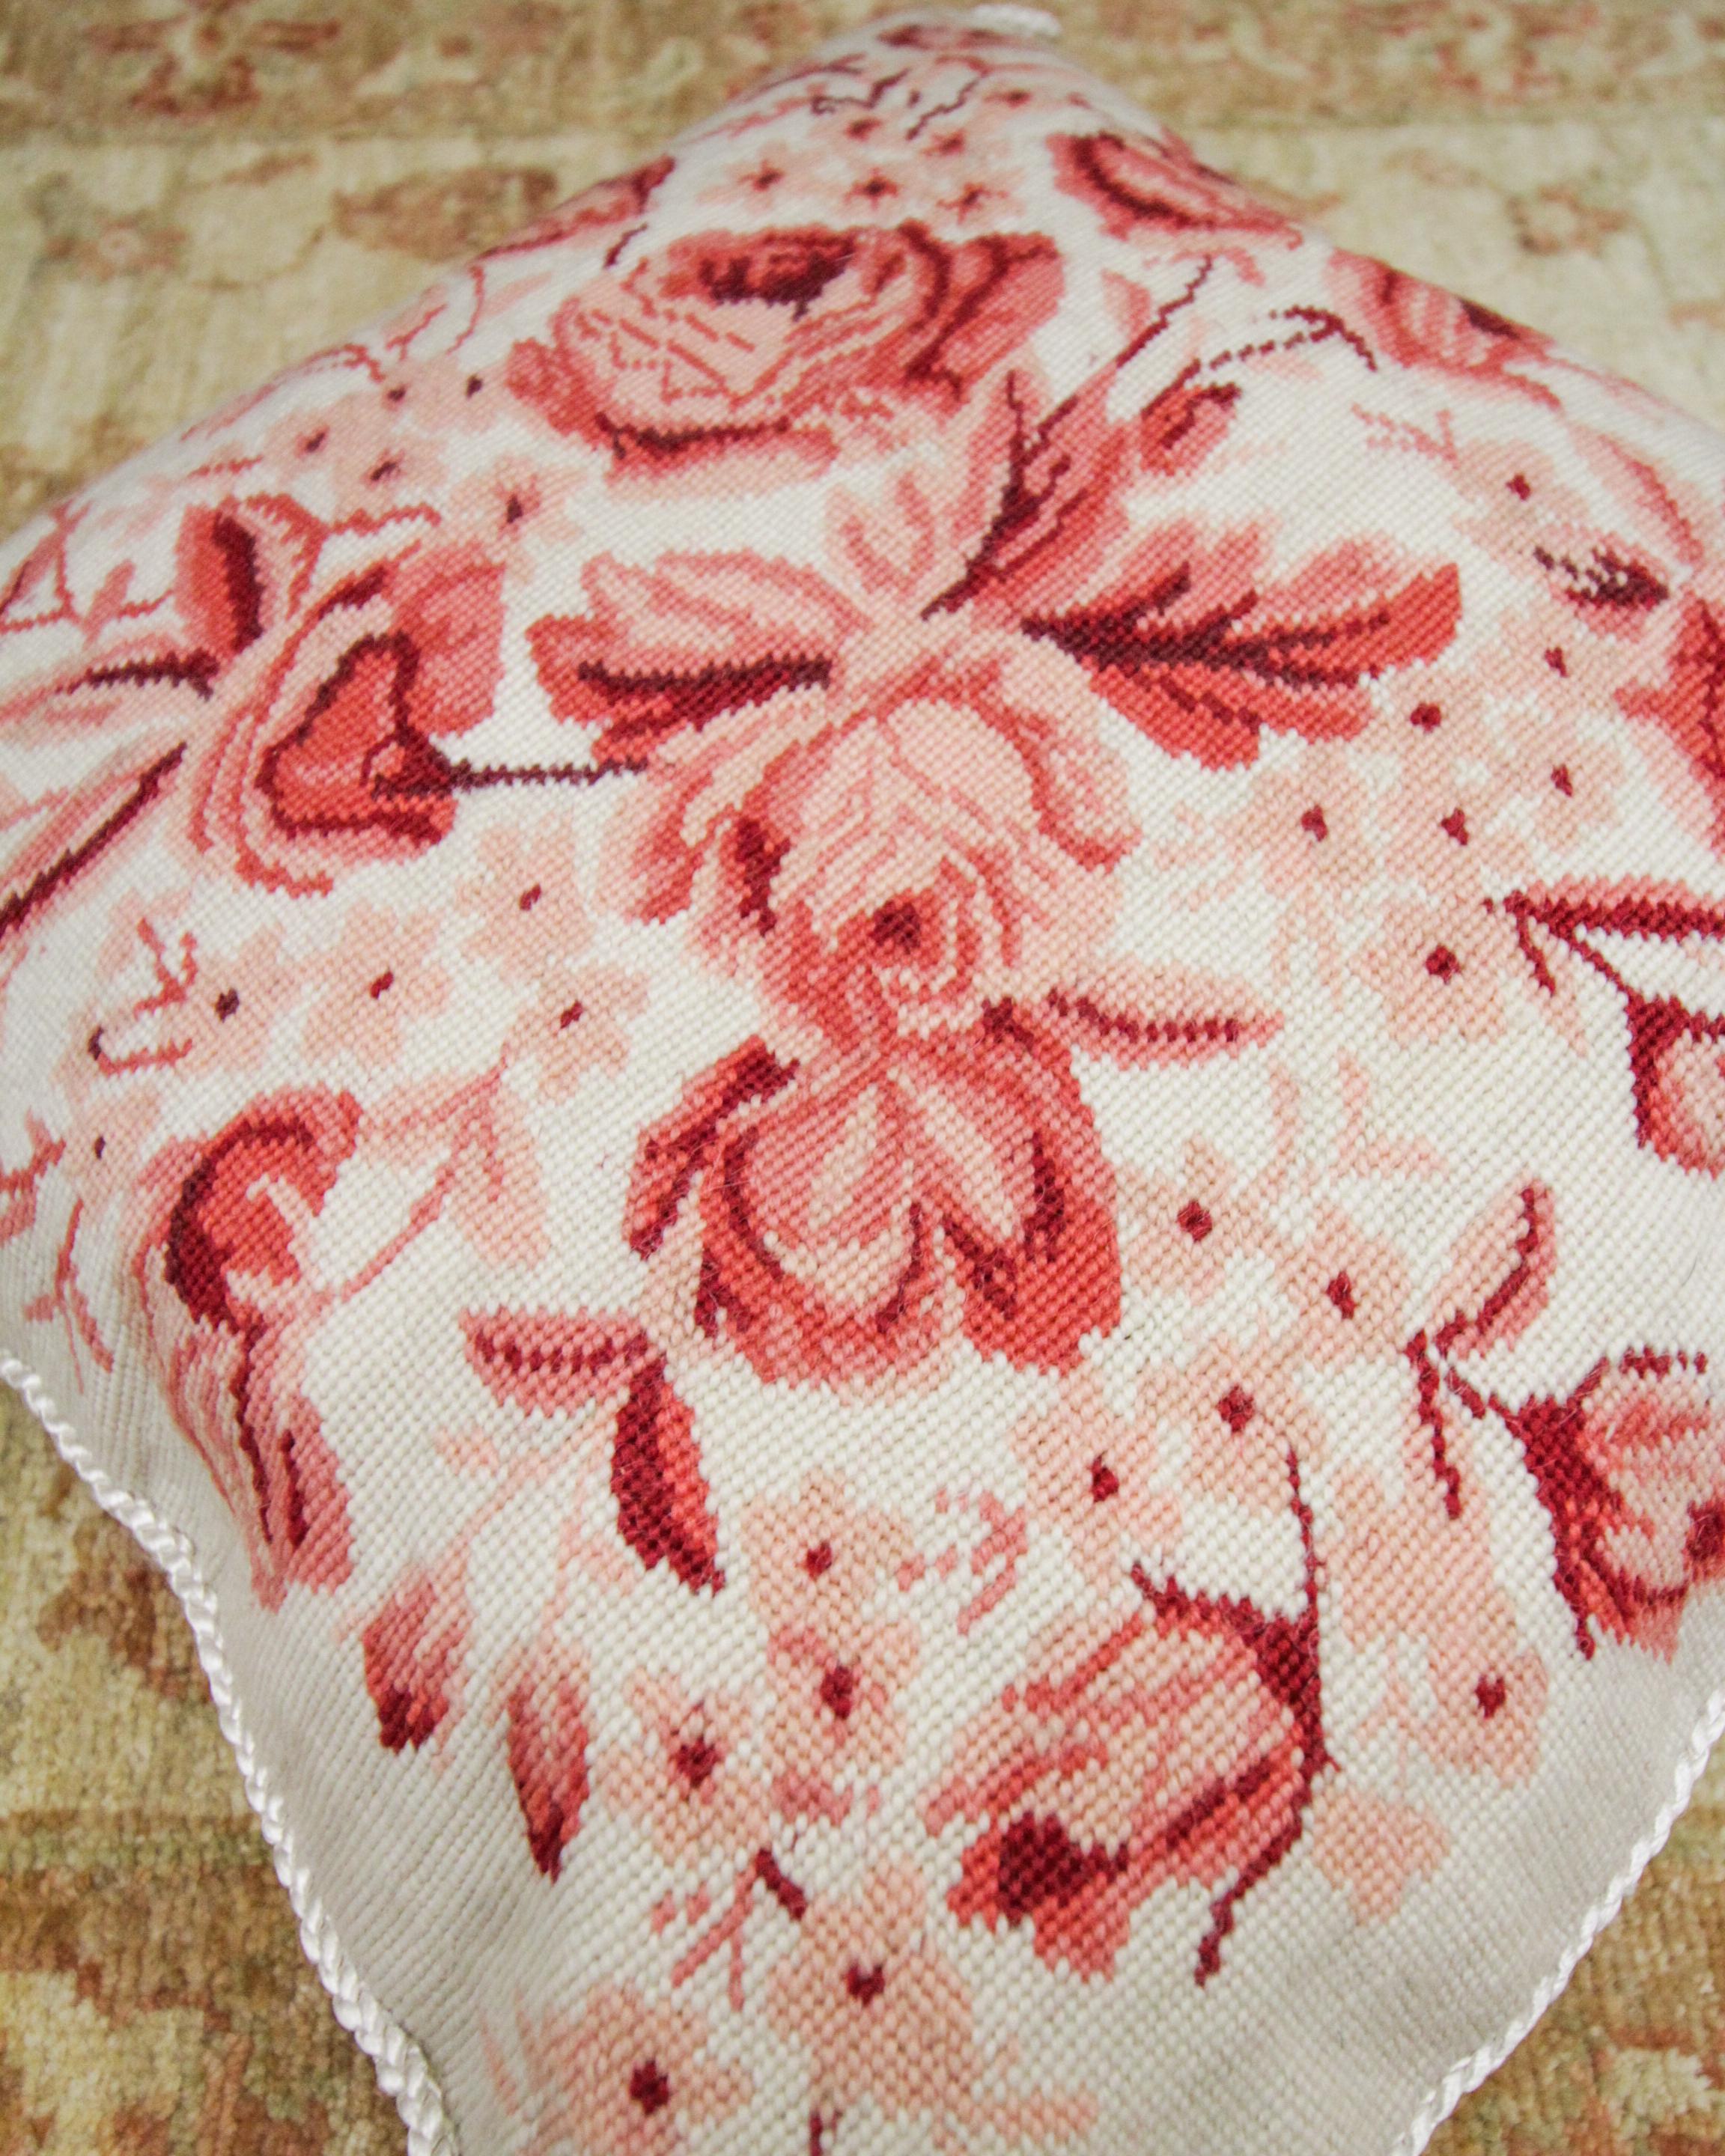 This floral hand needlepoint cushion cover is an excellent example of vintage cushion covers woven in the 1990s. The floral pattern has been woven in rich red and pink tones on a subtle cream background, detailed with a rope edge and corner design.